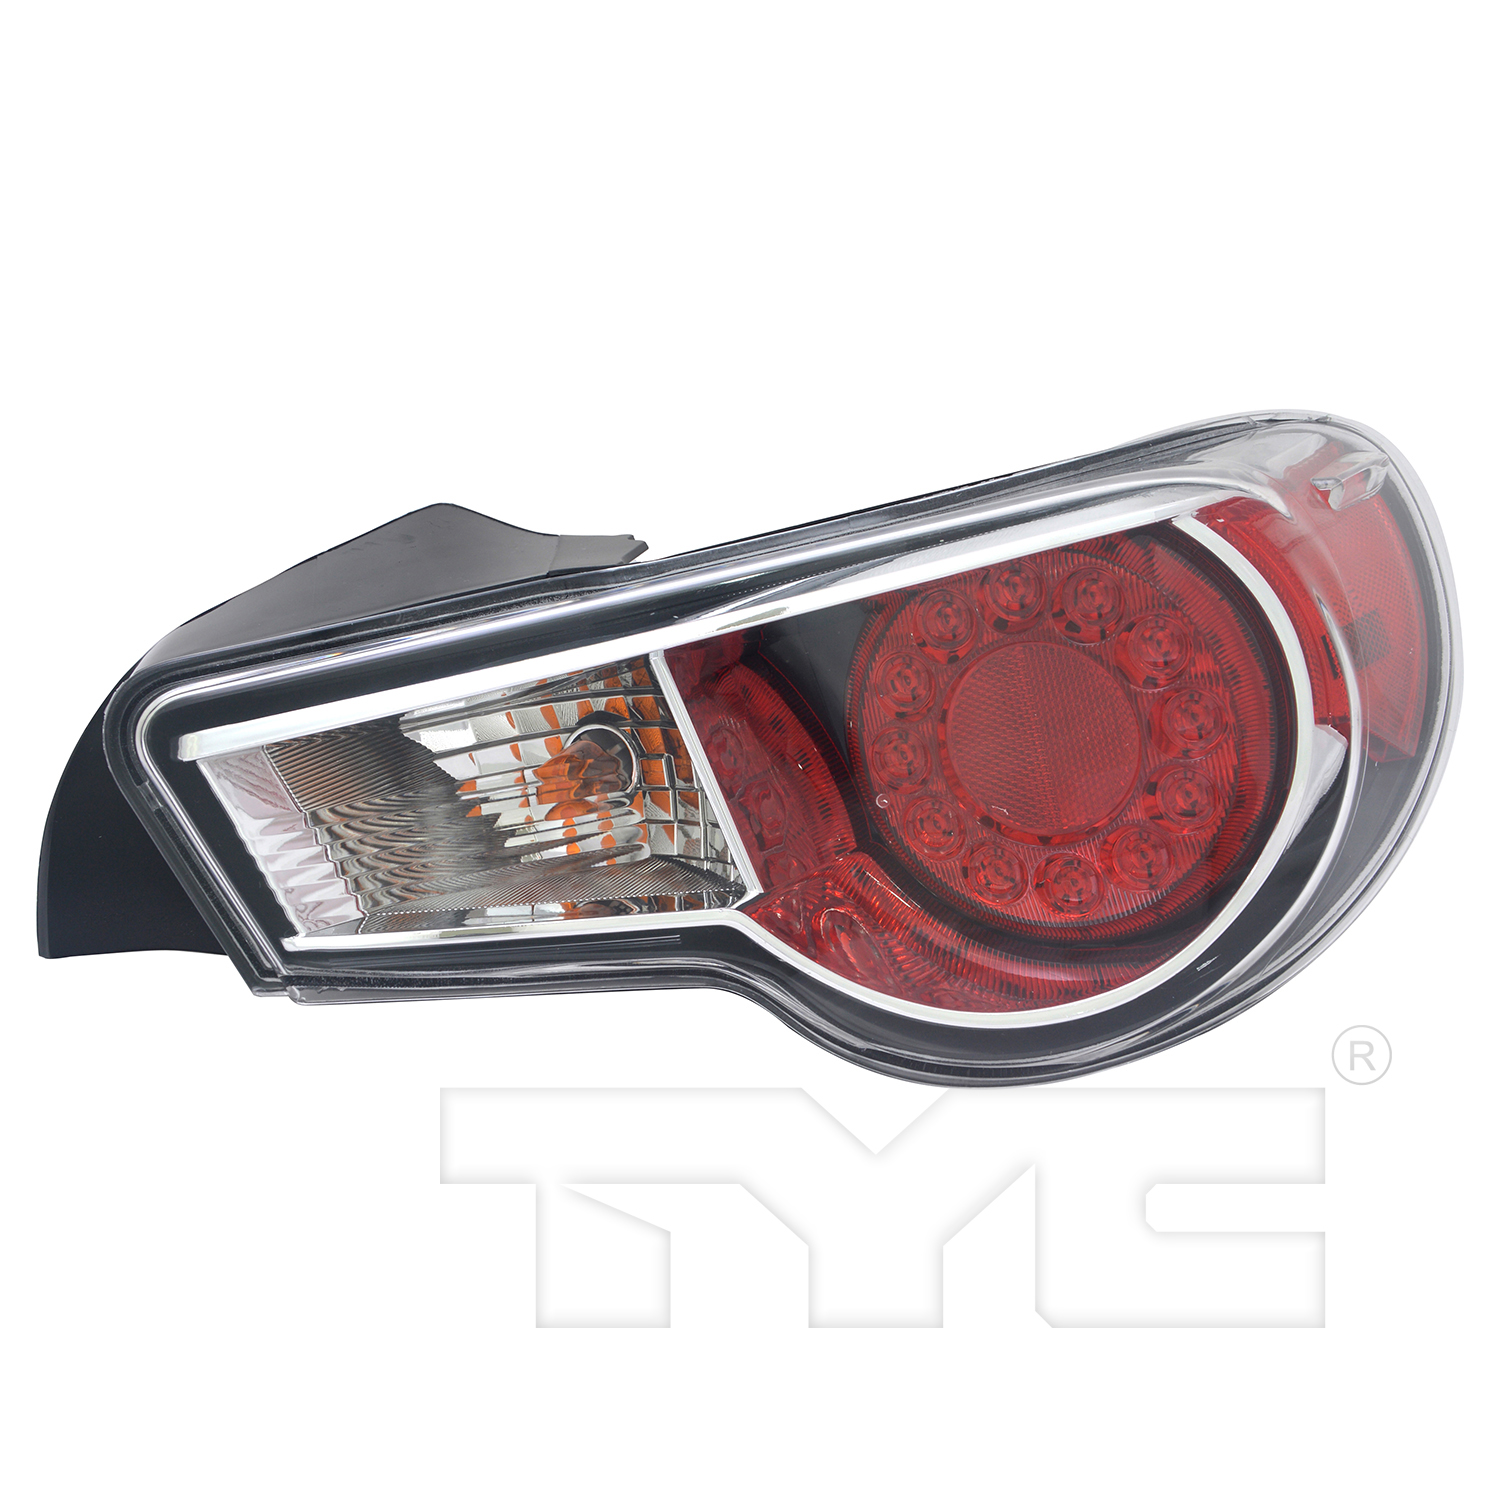 Aftermarket TAILLIGHTS for SCION - FR-S, FR-S,13-16,RT Taillamp lens/housing